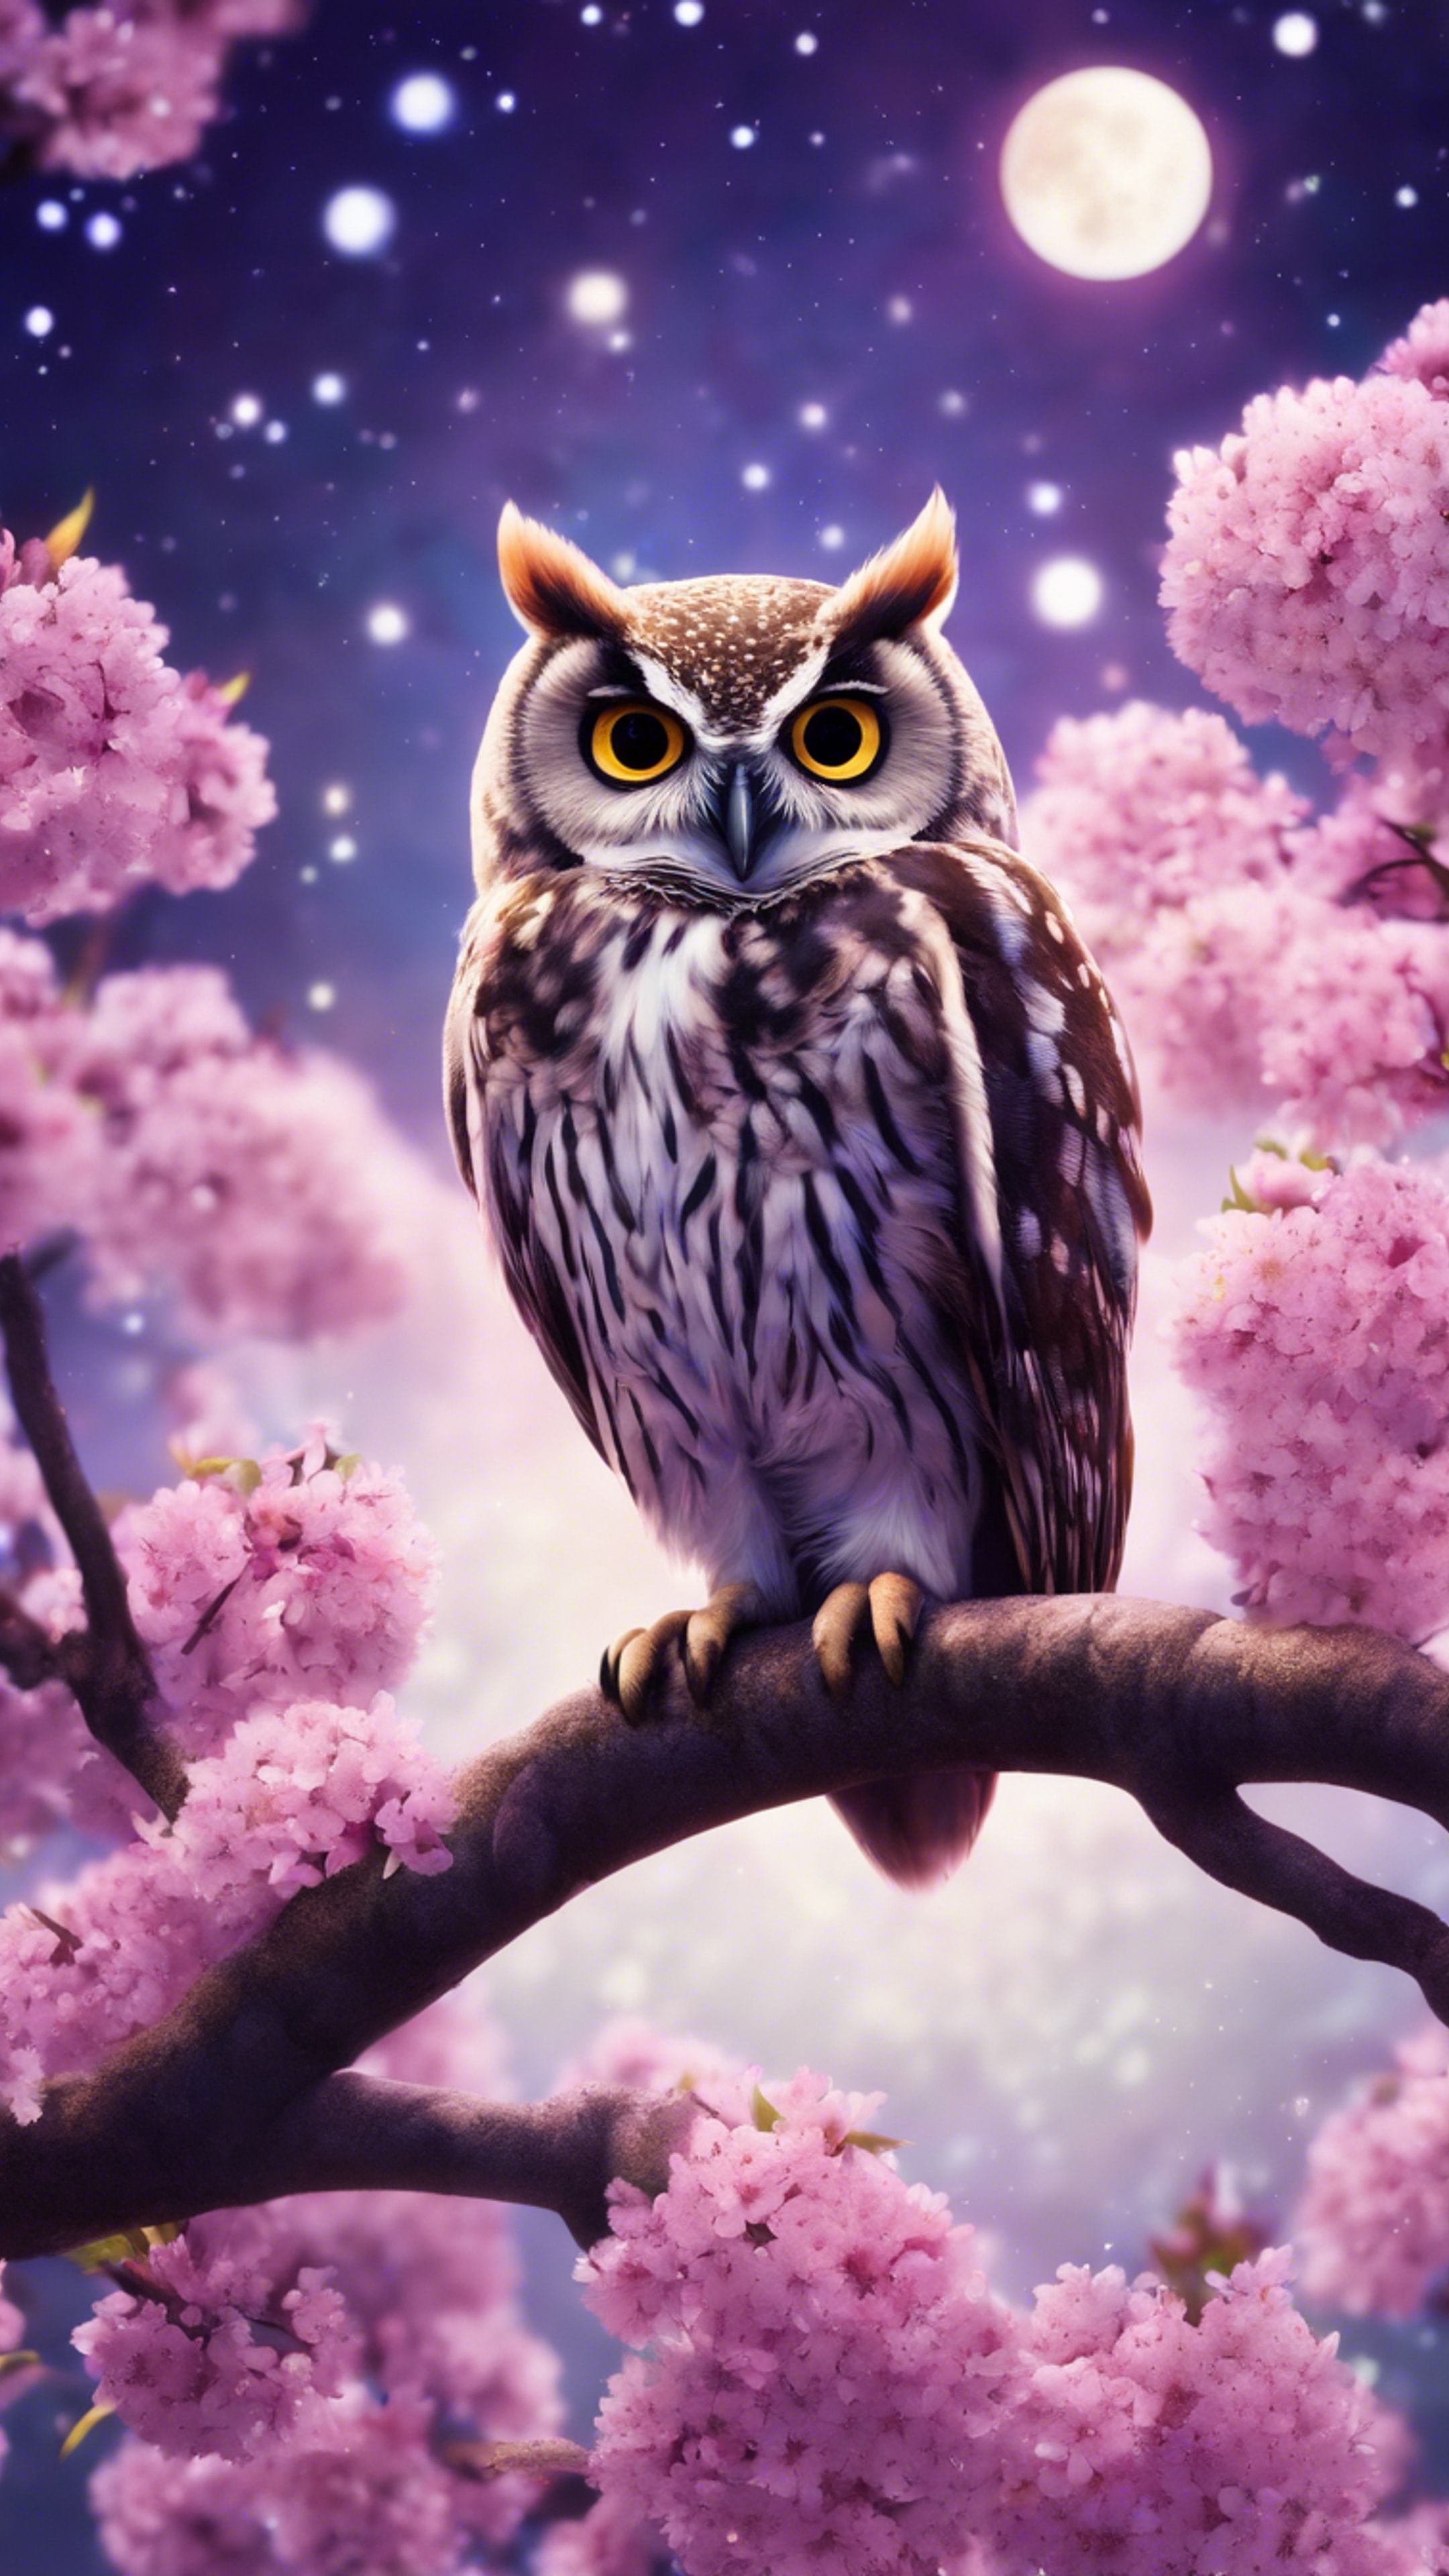 A cute kawaii style owl perched on a cherry blossom tree that blooms vibrant purple flowers, under a moonlit starry night. טפט[d4c437875b7e43ac9353]